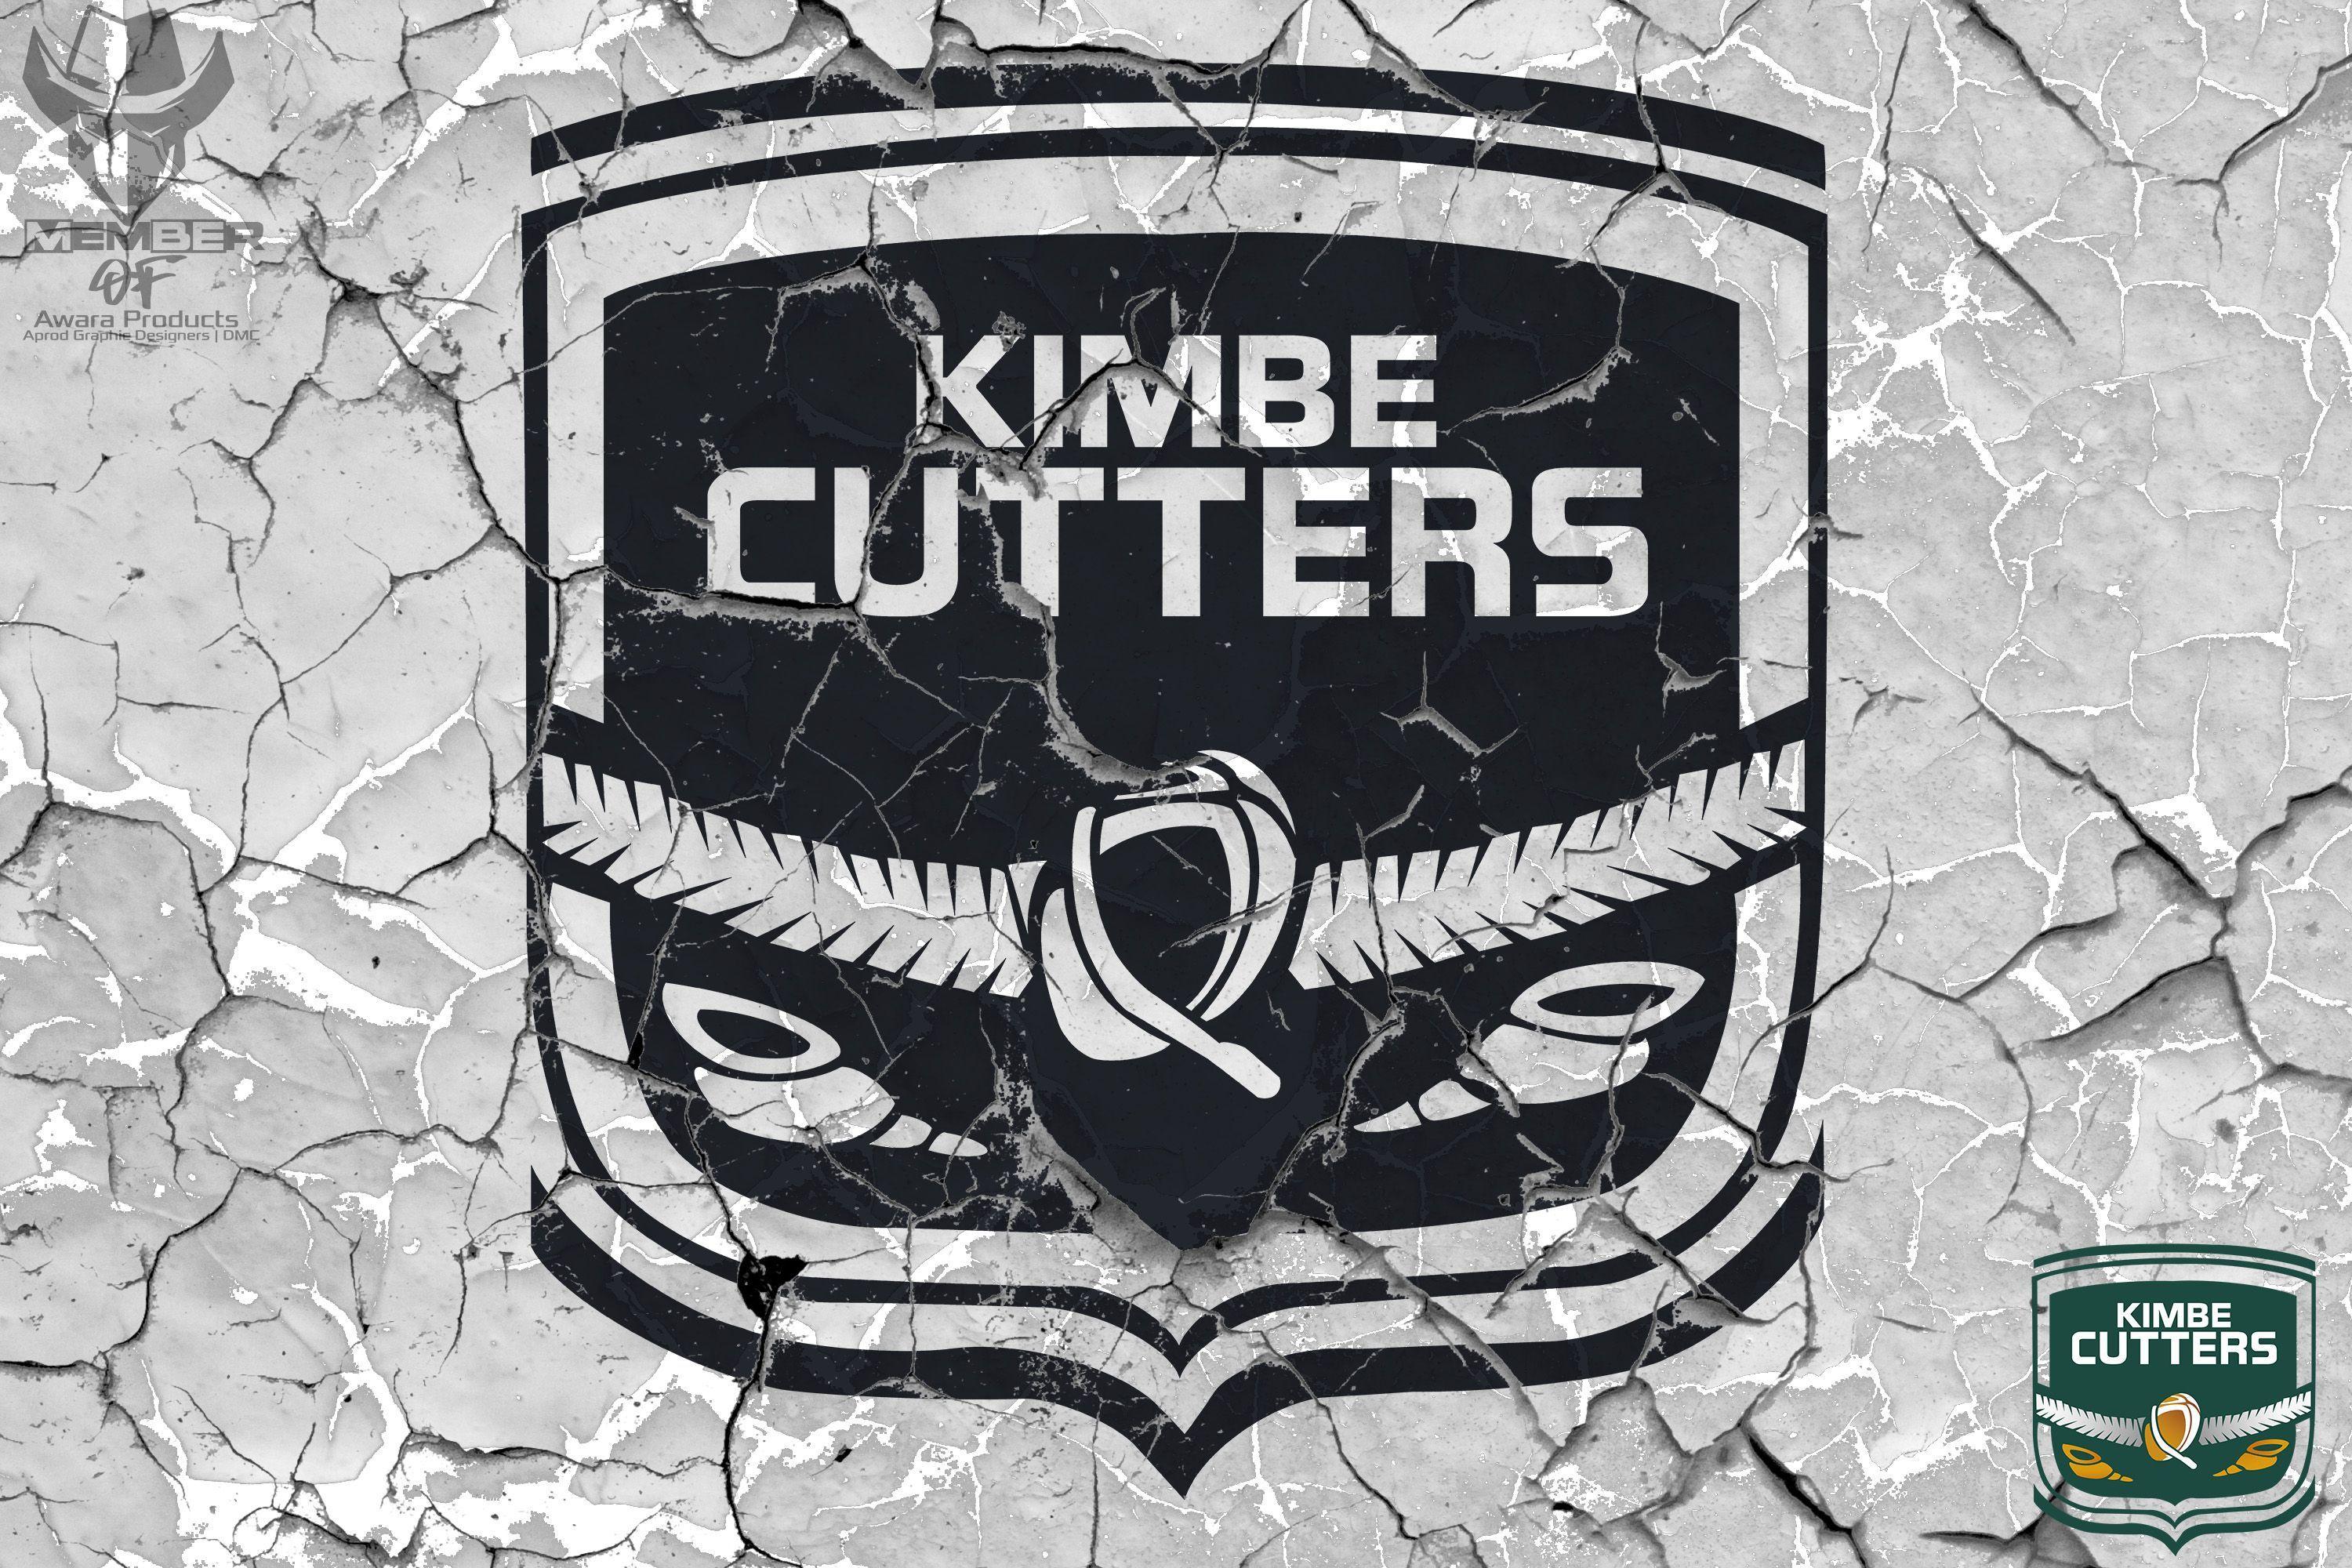 Cutters Logo - Kimbe Cutters High Resolution: 3000 x 2000 File Size: 1200KB ...